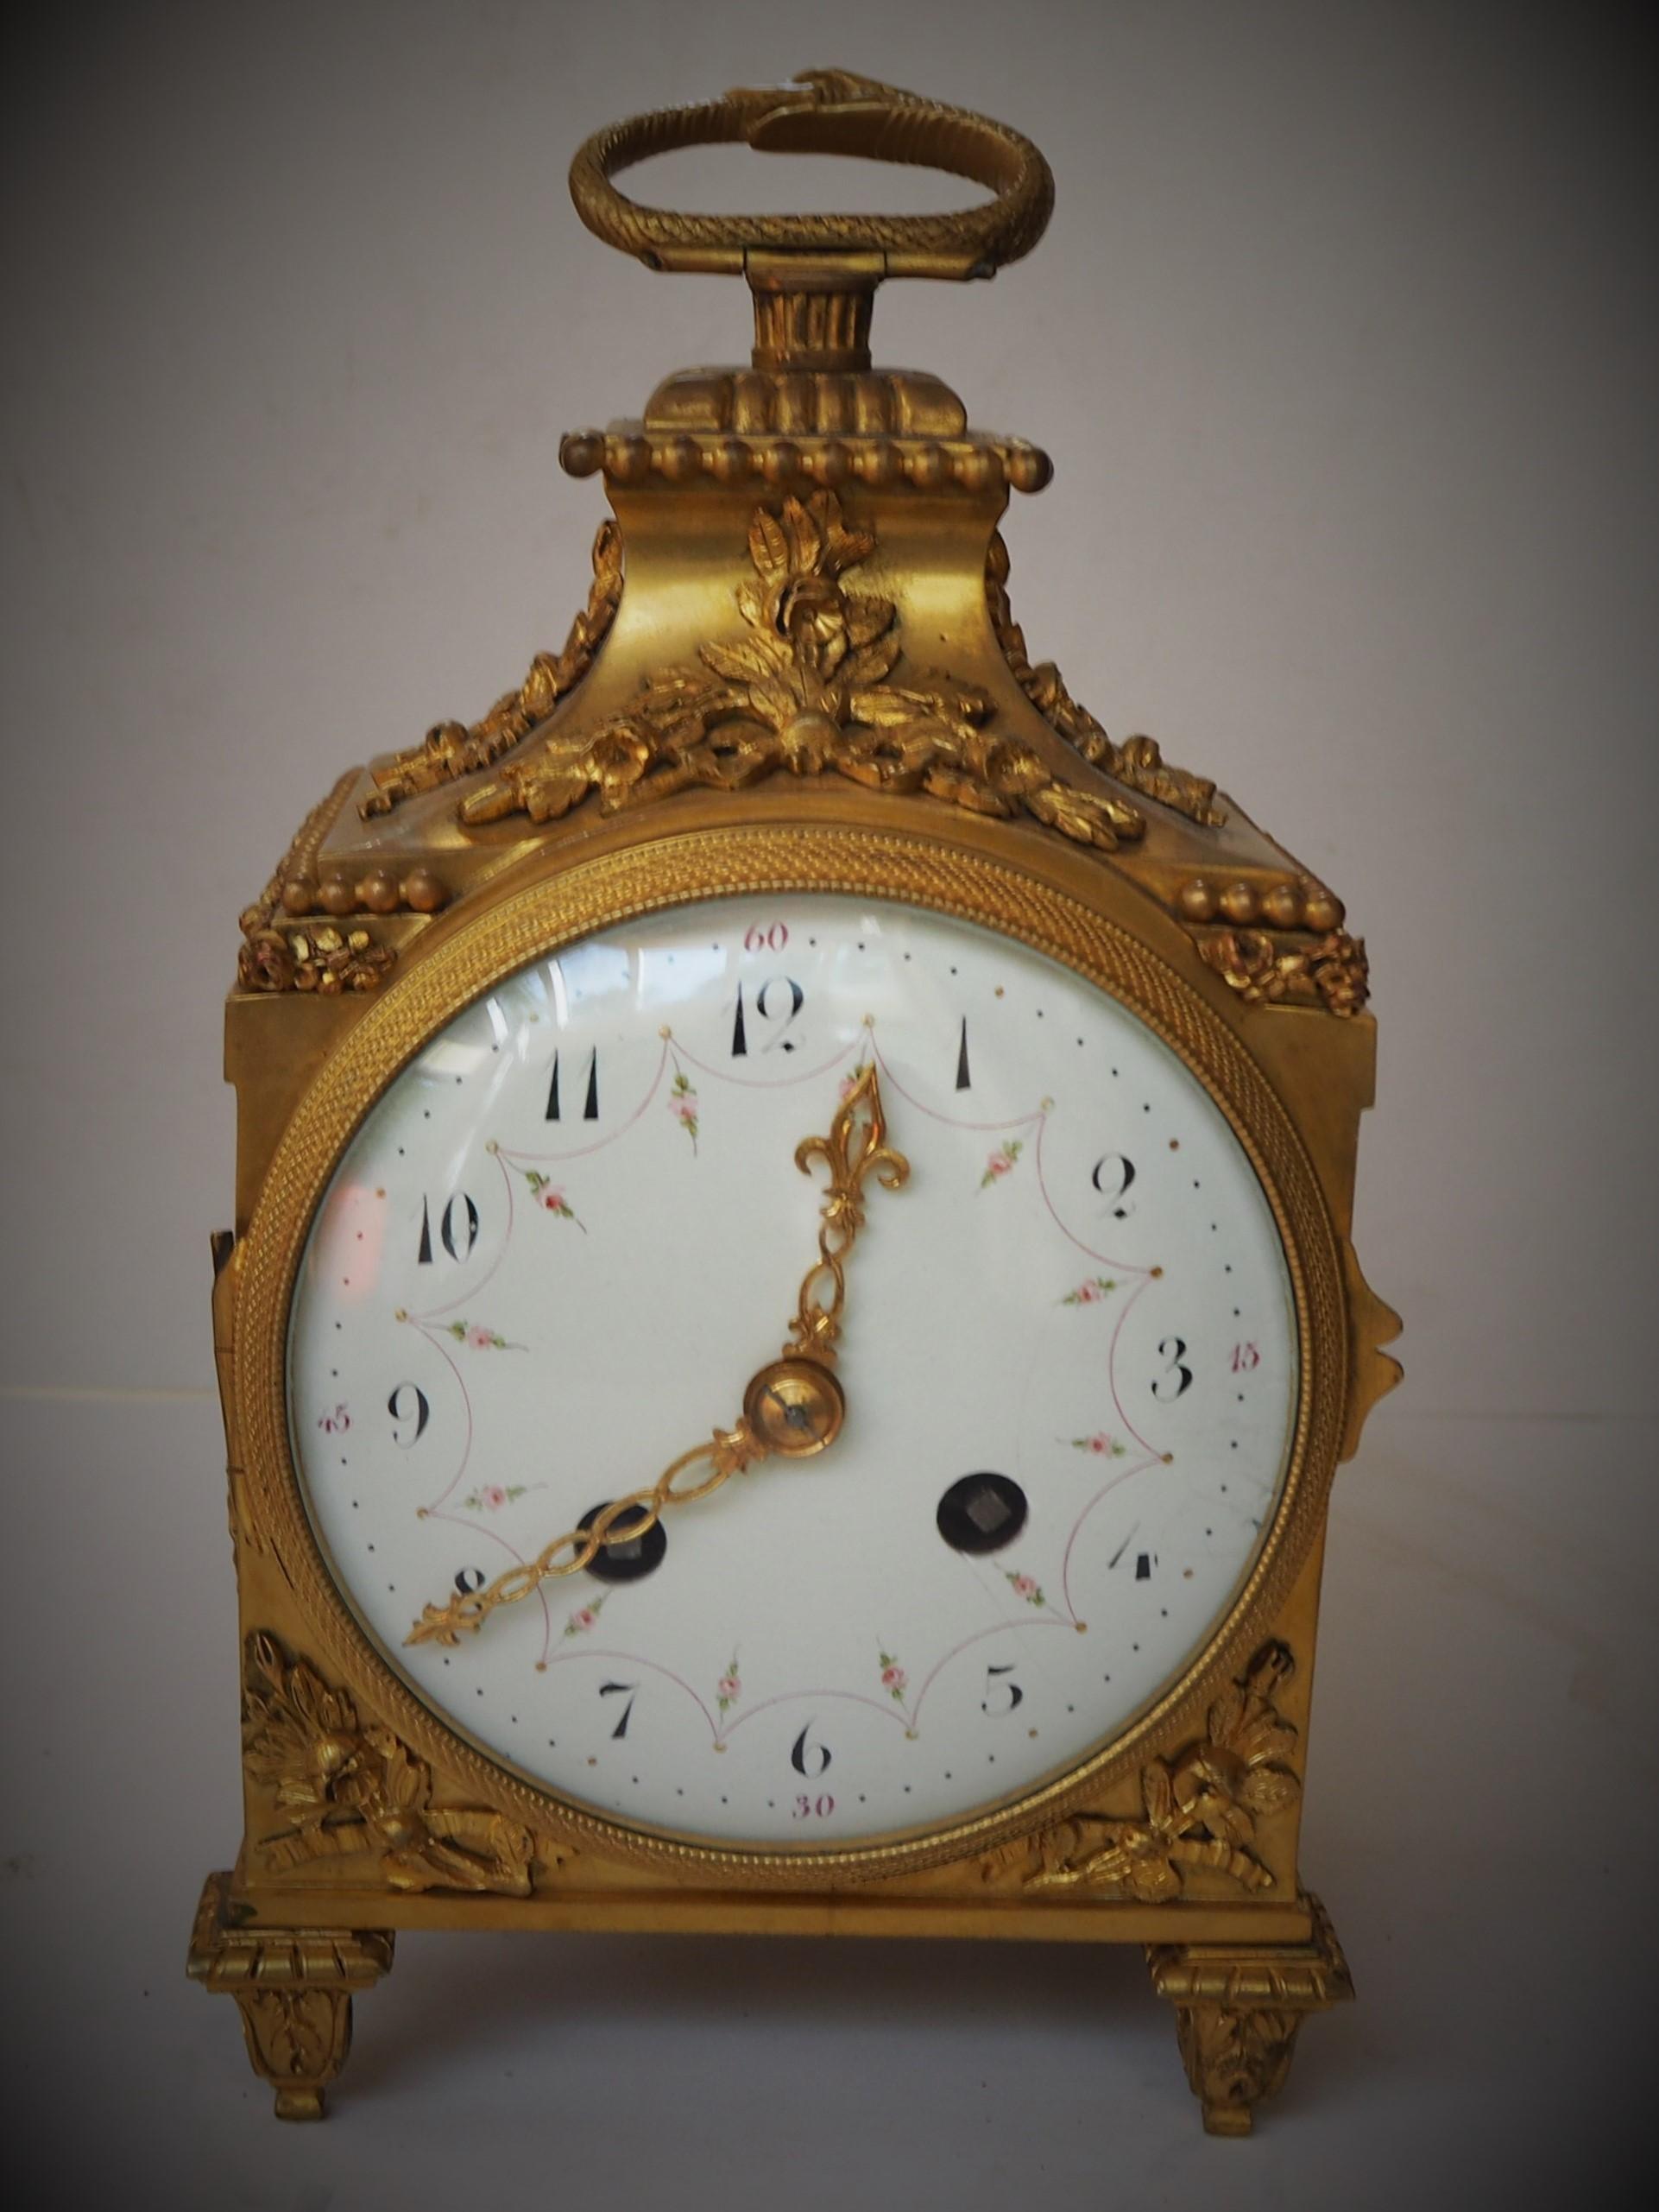 19th Century French gilt bronze mantle clock by Samuel Marti Paris. Awarded the Gold Medal and exhibited in the Paris Exhibition. This rather beautiful small mantle clock has a domed enamel and sensitively decorated dial with Roman numerals, strikes